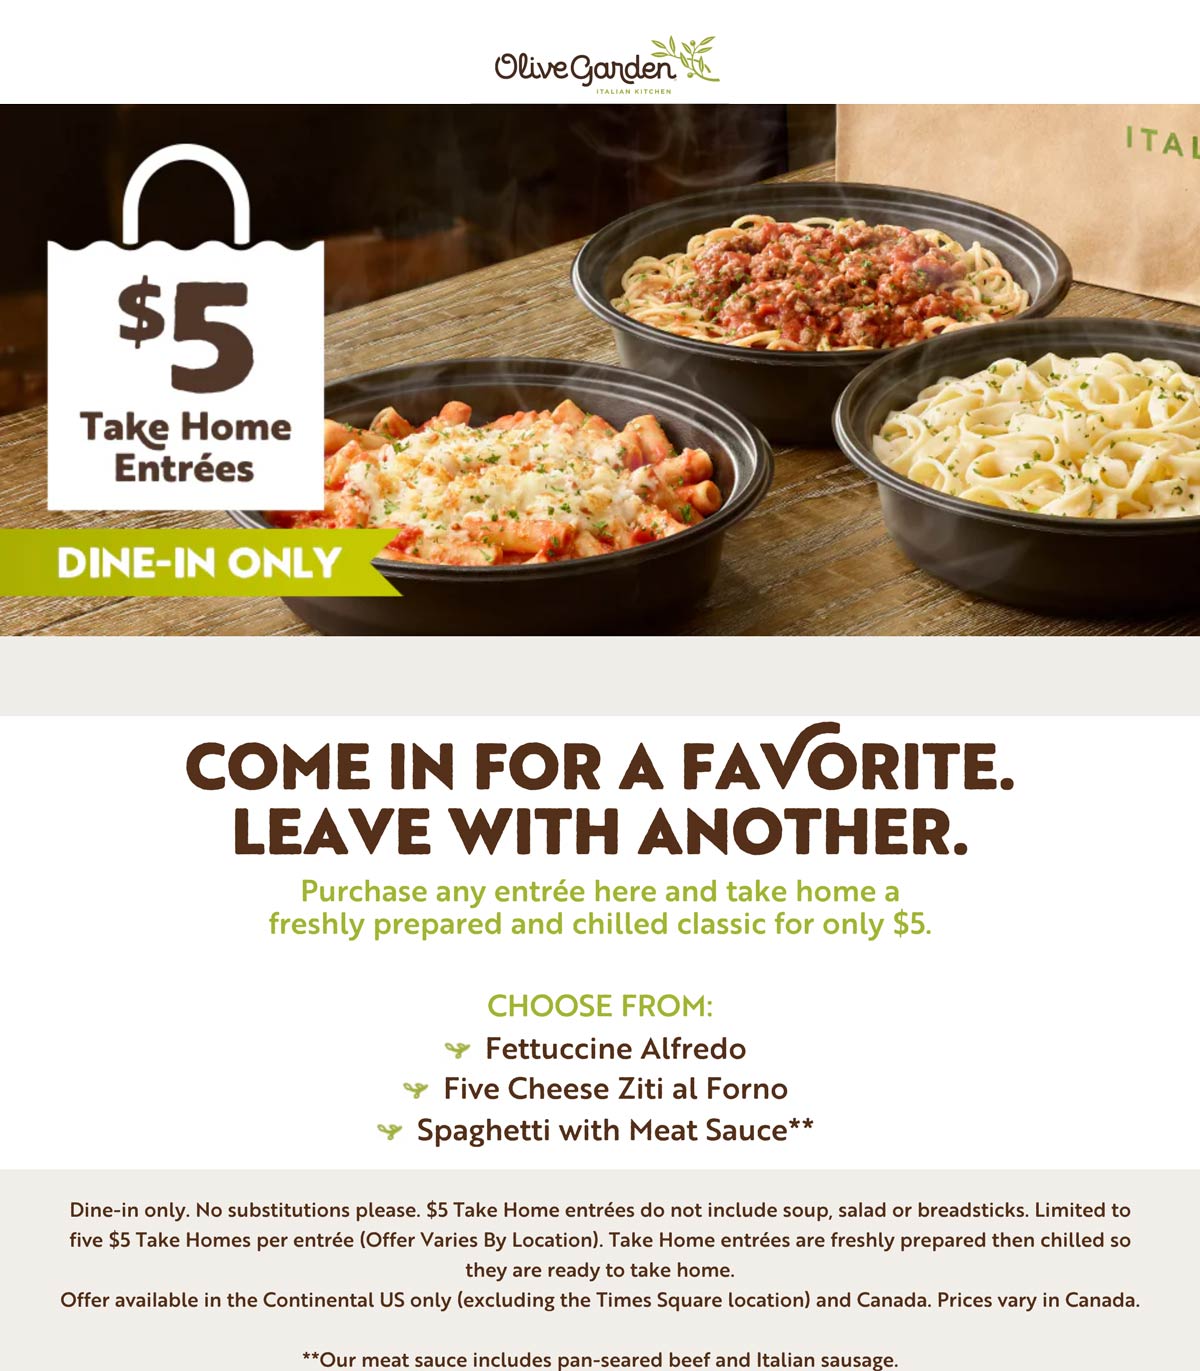 5-take-home-entrees-with-your-dine-in-meal-at-olive-garden